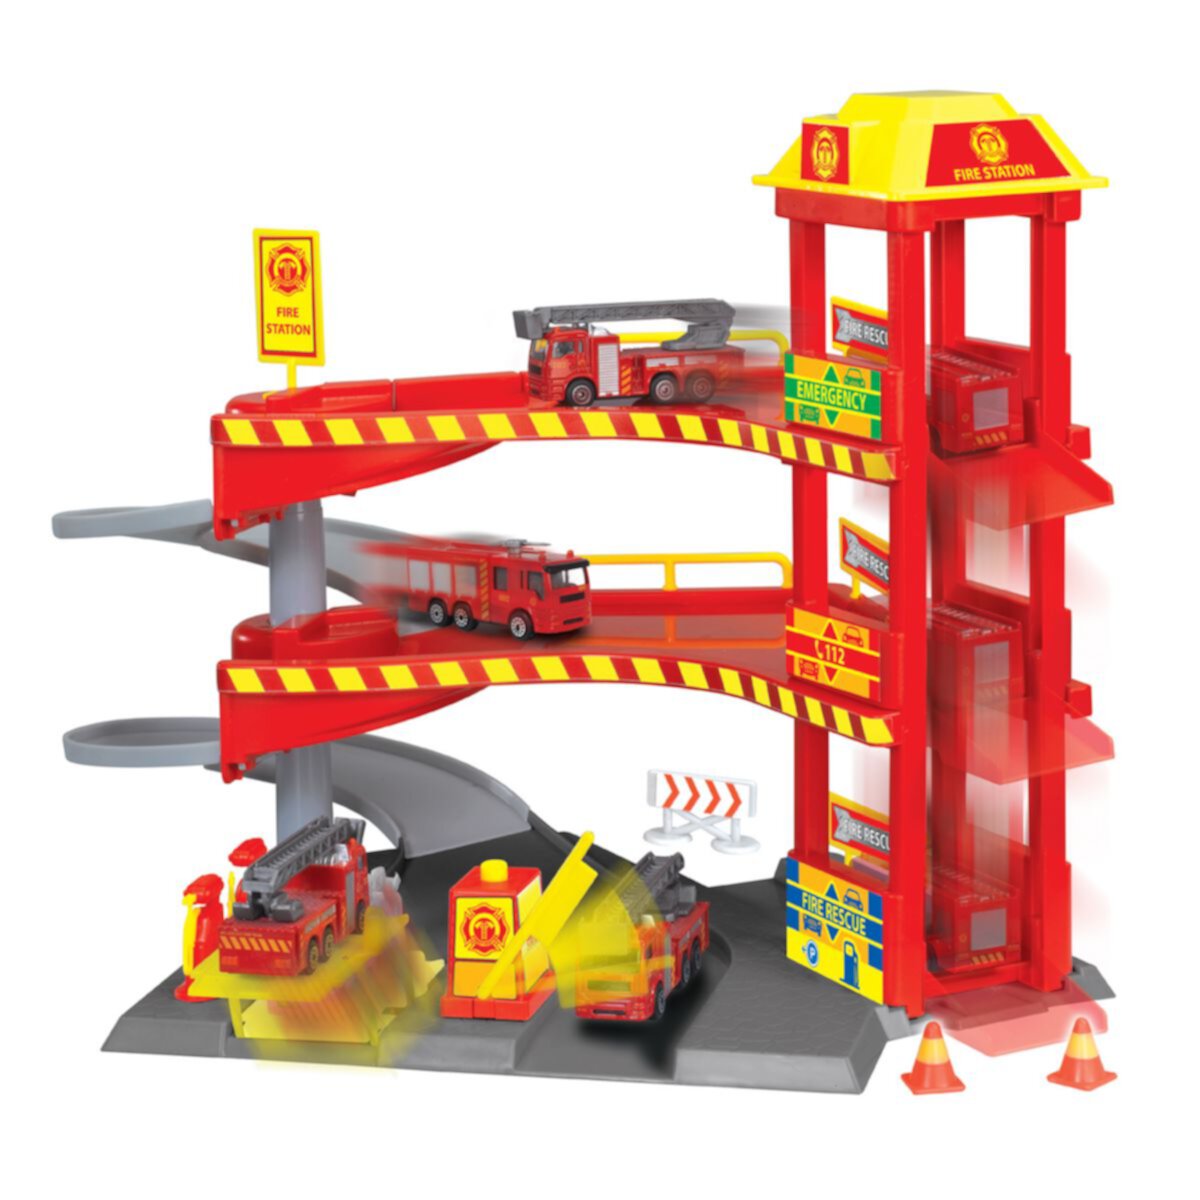 Dickie Toys Fire Station Playset Dickie Toys